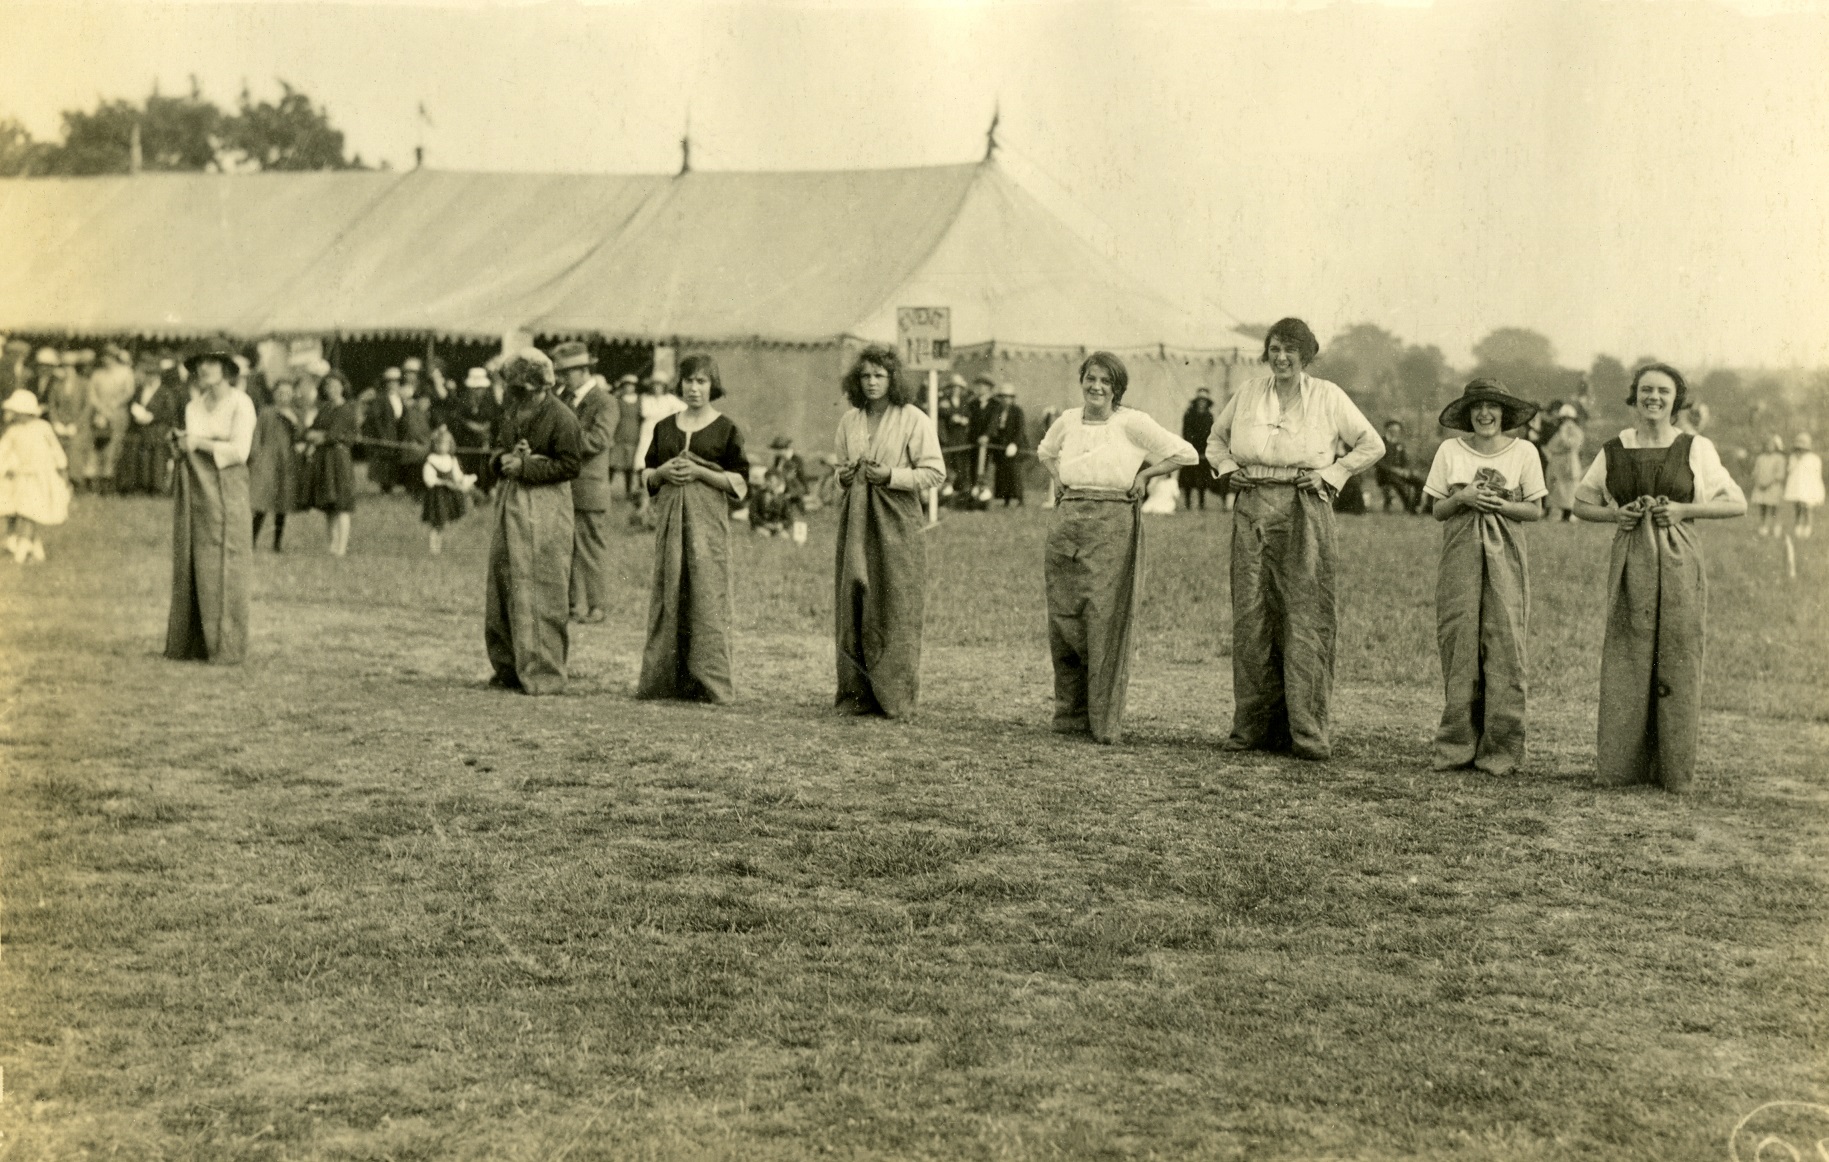 A sack race at the Needler’s sports day in 1925.